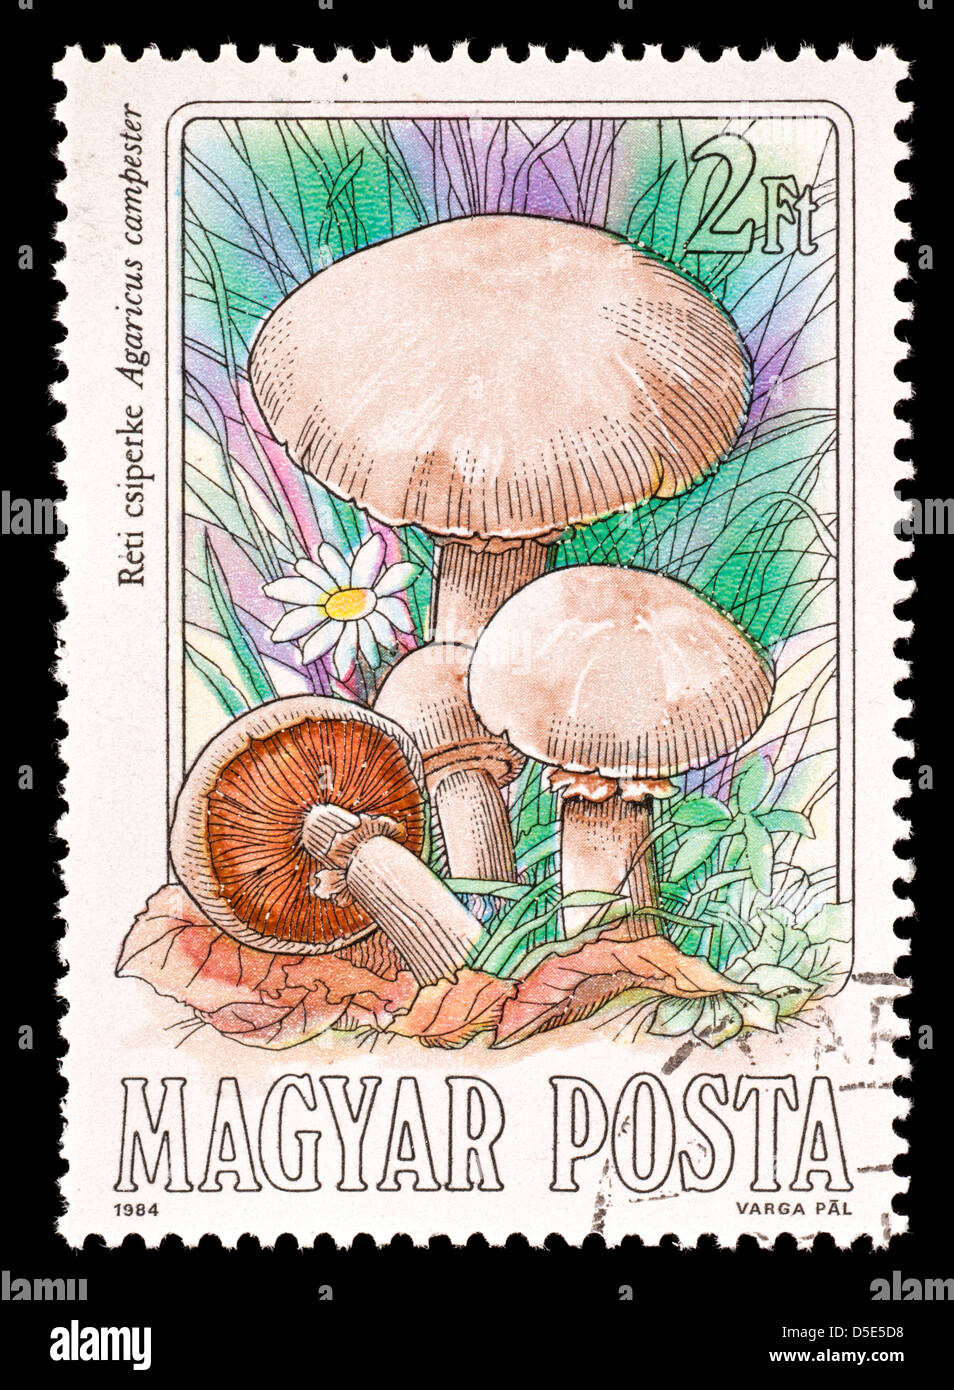 Postage stamp from Hungary depicting a field mushroom (Agaricus campester) Stock Photo